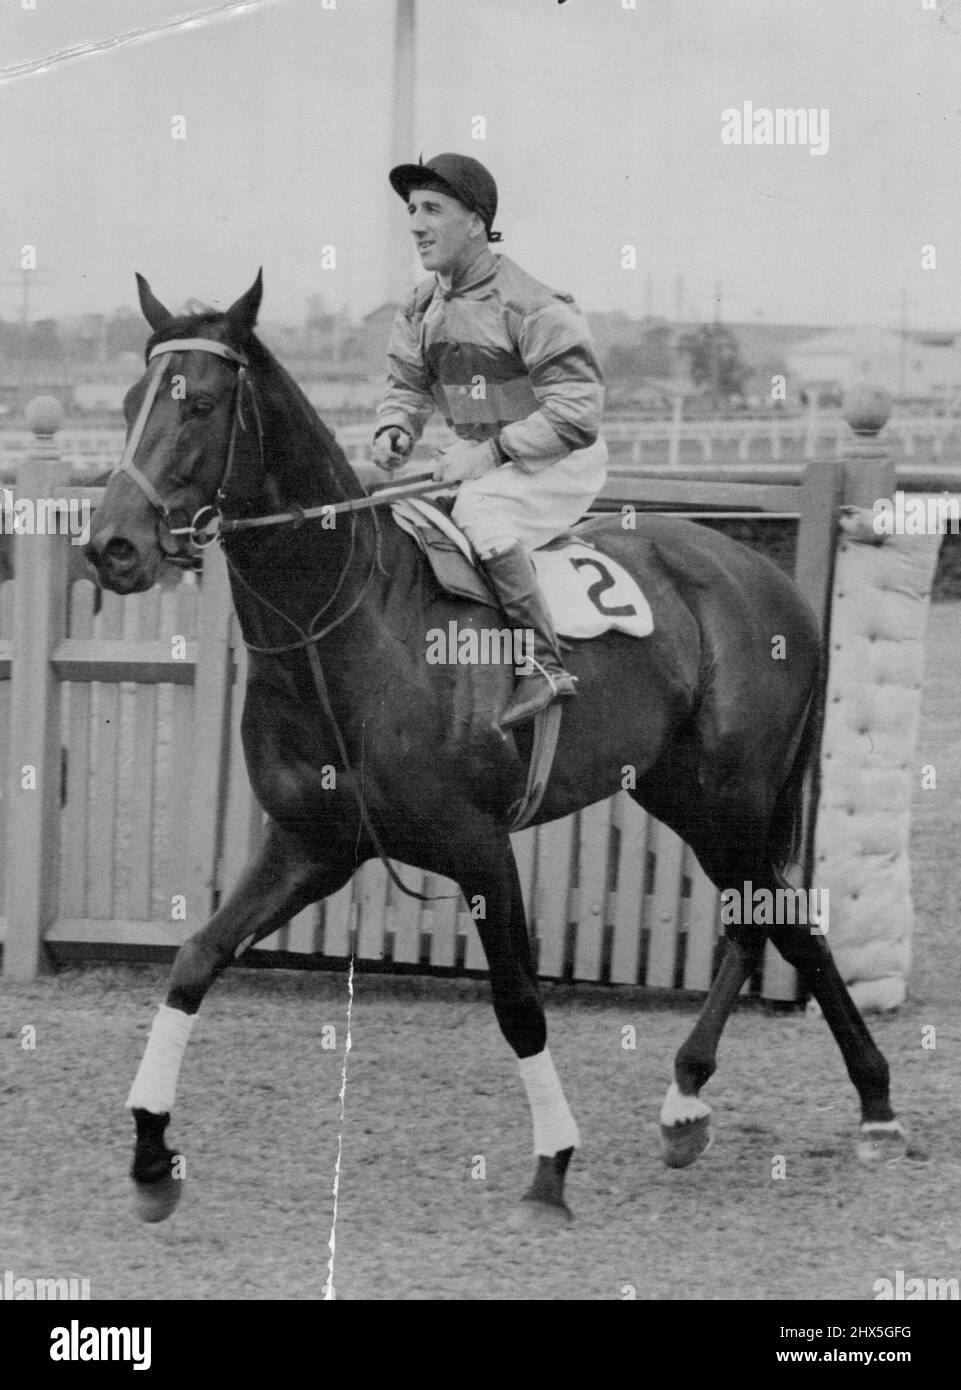 Fastest time for a Melbourne cup, 3mins, 21 sees was run by both Wotan and Russia. But **** horse holds the two miles record for Australia? (a) Windbag (b) Phar Lap (c) Spear Chief (d) Peter Pan. April 04, 1939. Stock Photo